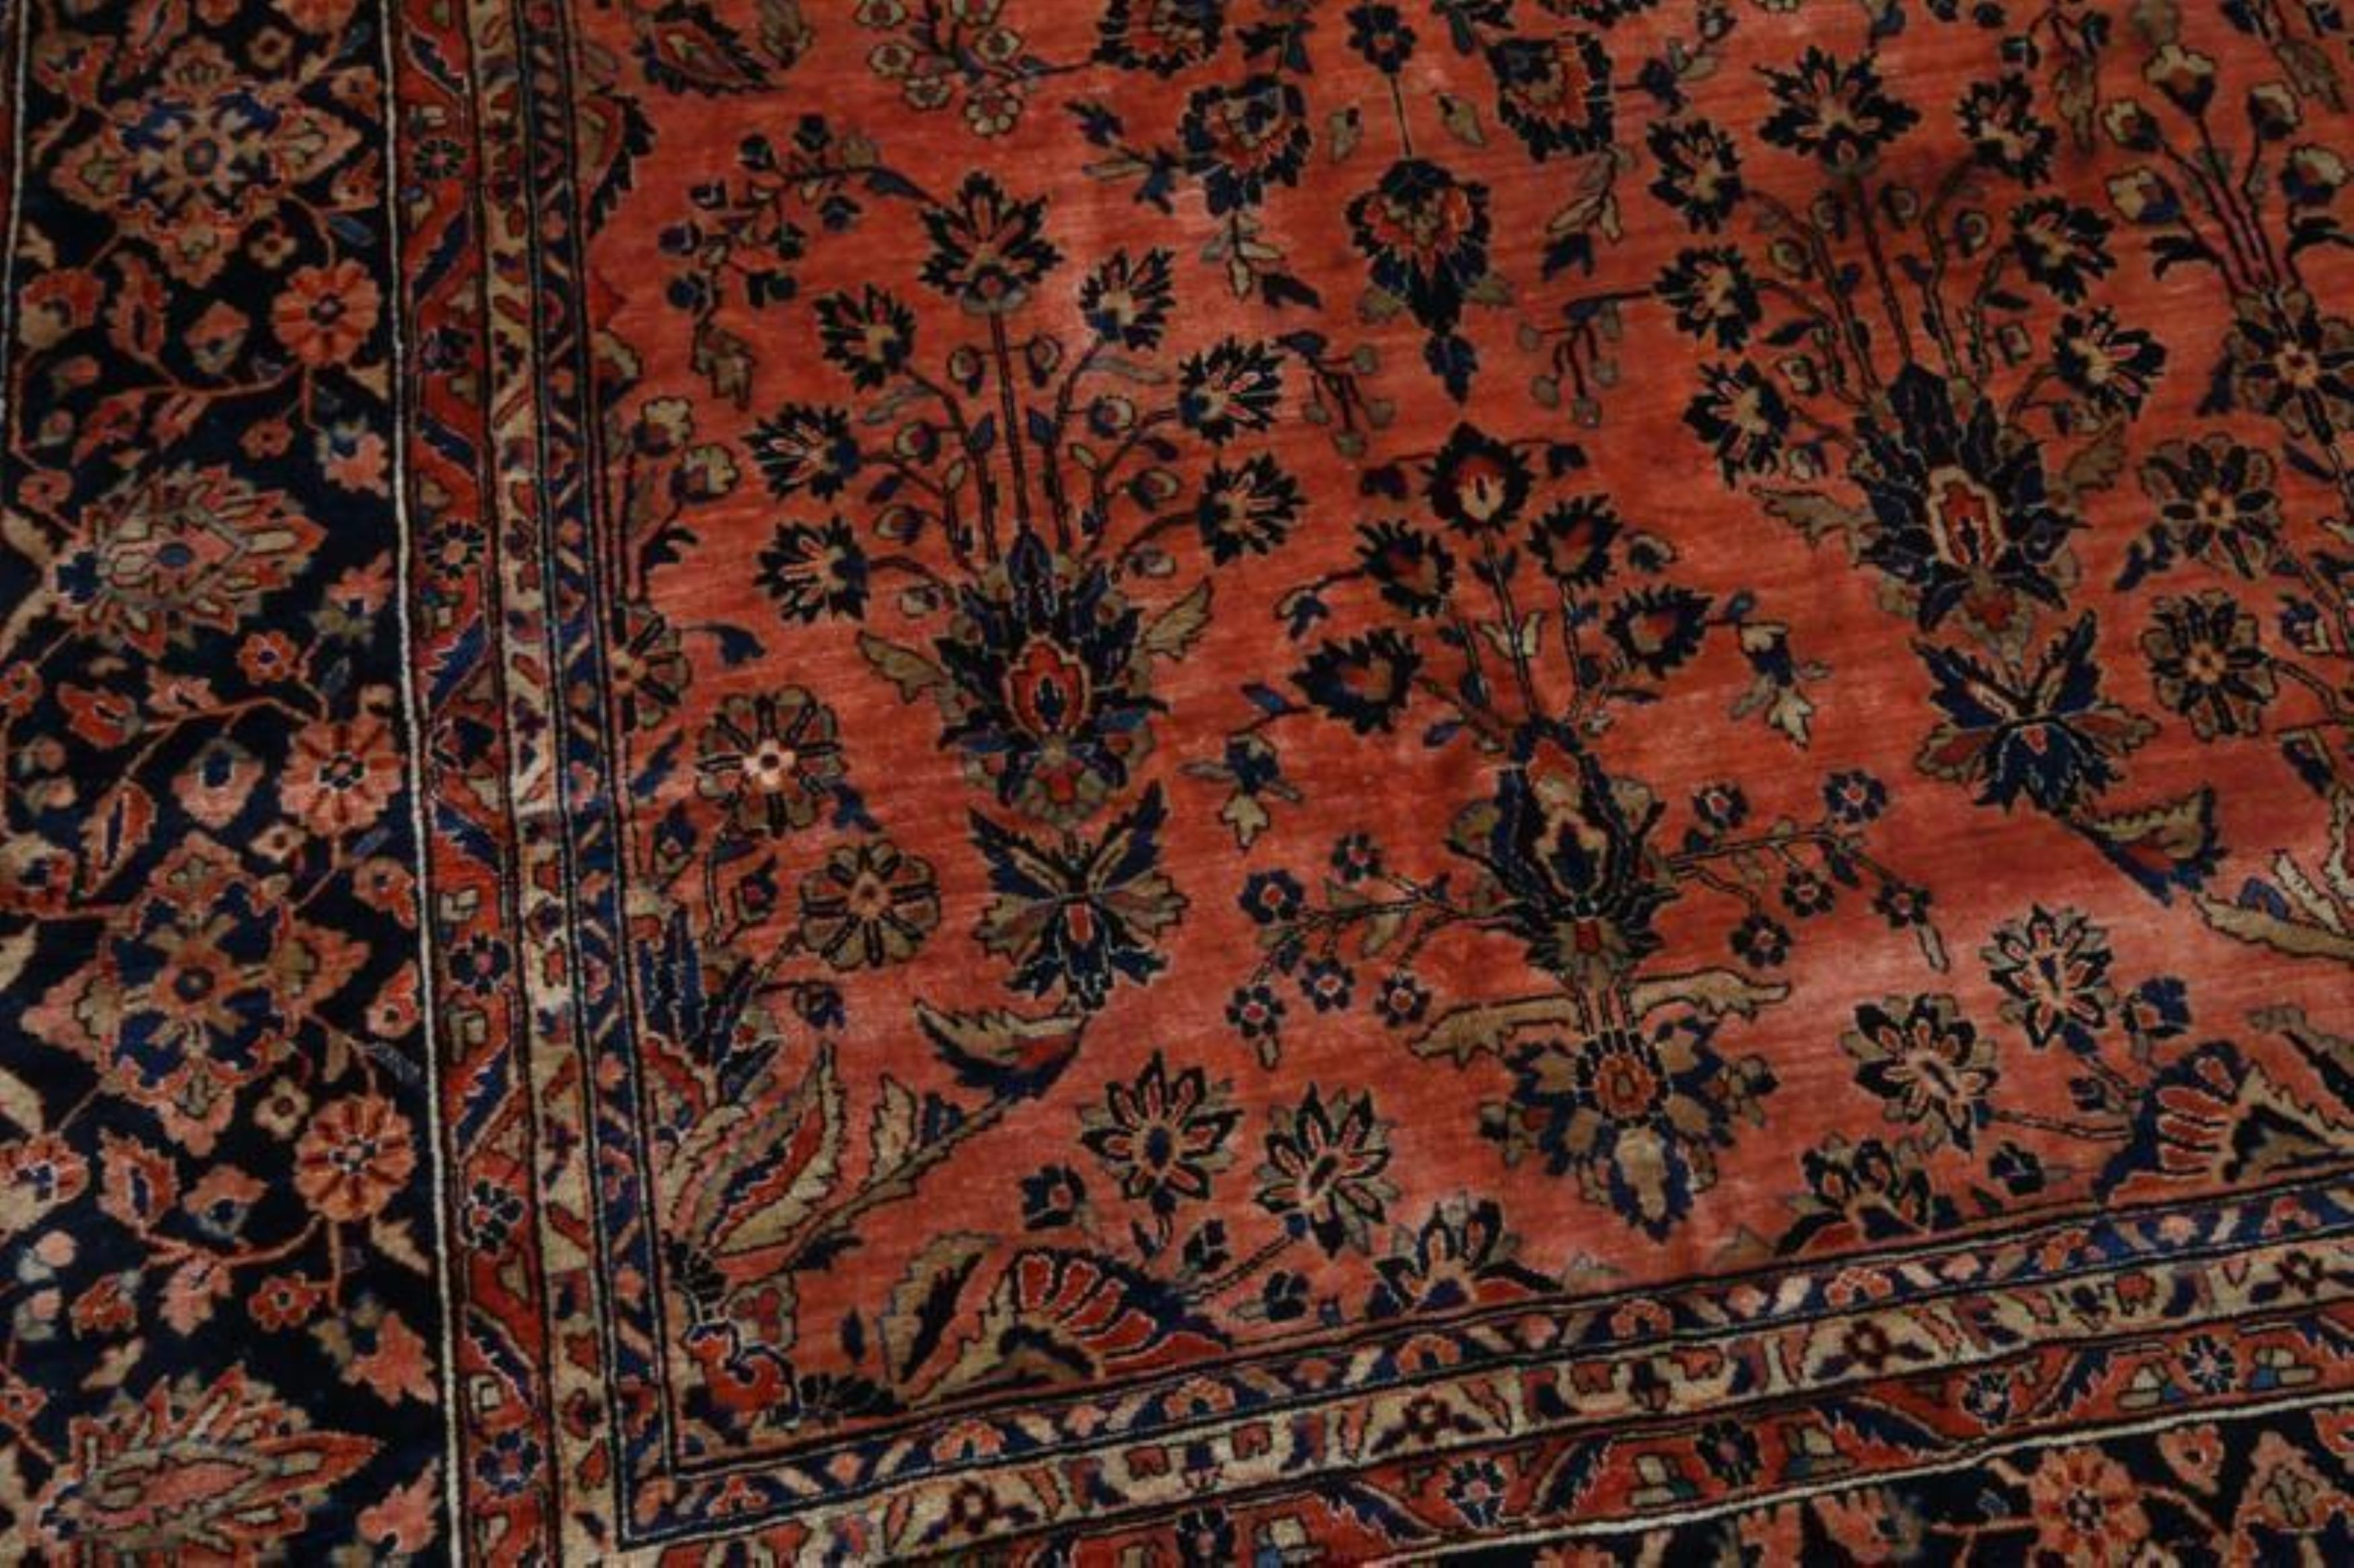 Folk Art Hand-Knotted Antique Sarouk Persian Rug in Orange and Black Floral Pattern For Sale